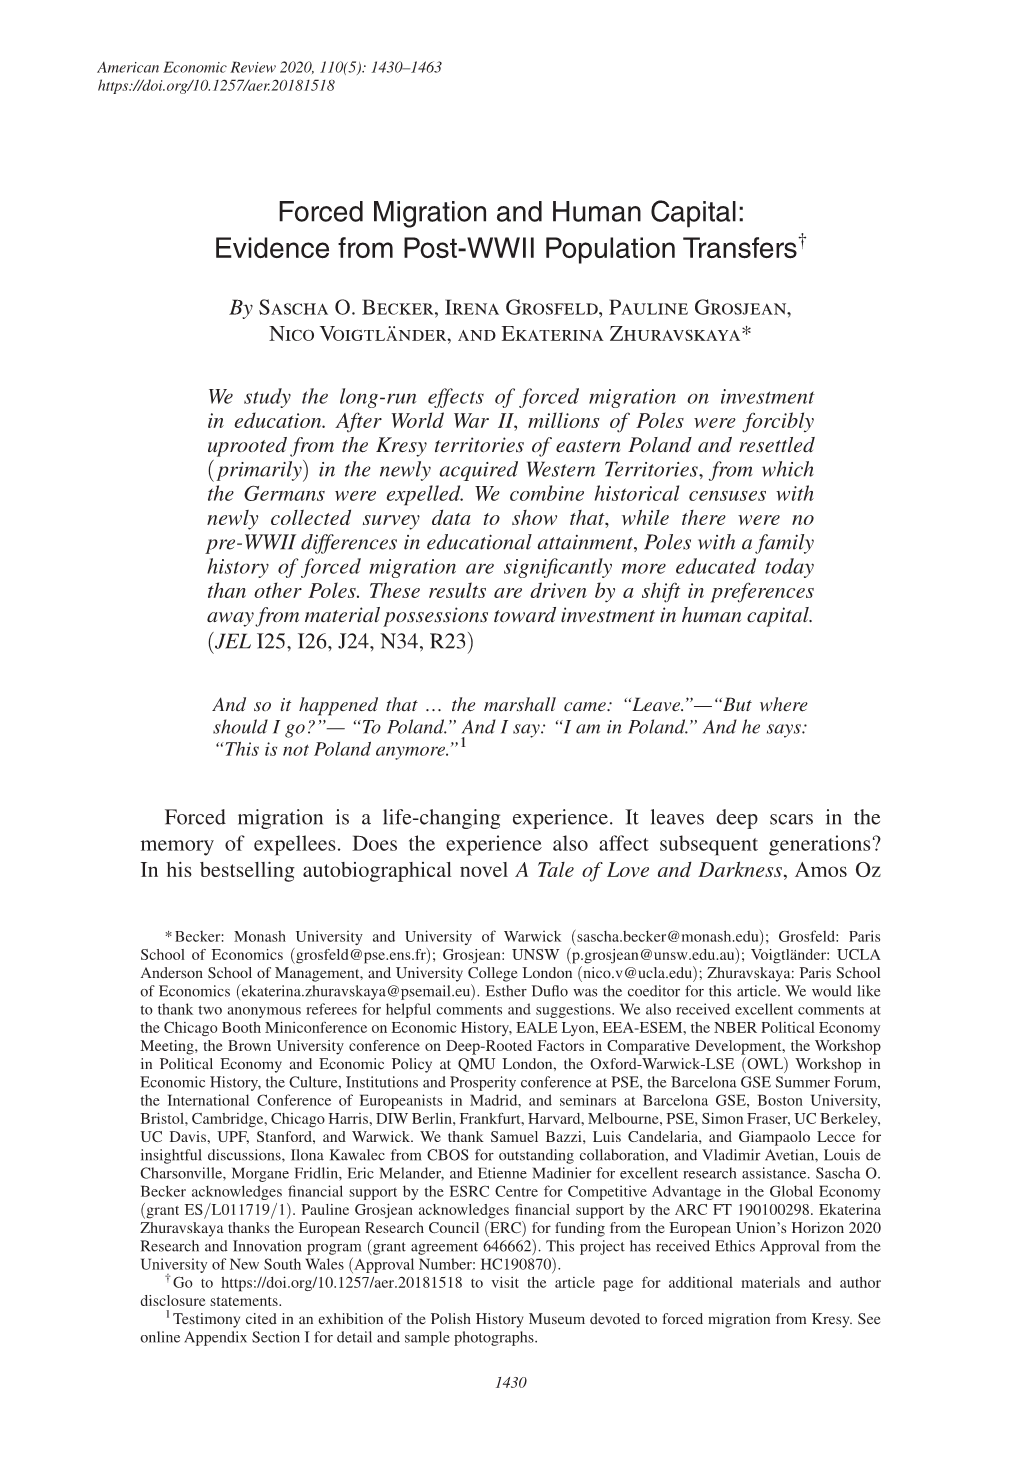 Forced Migration and Human Capital: Evidence from Post-WWII